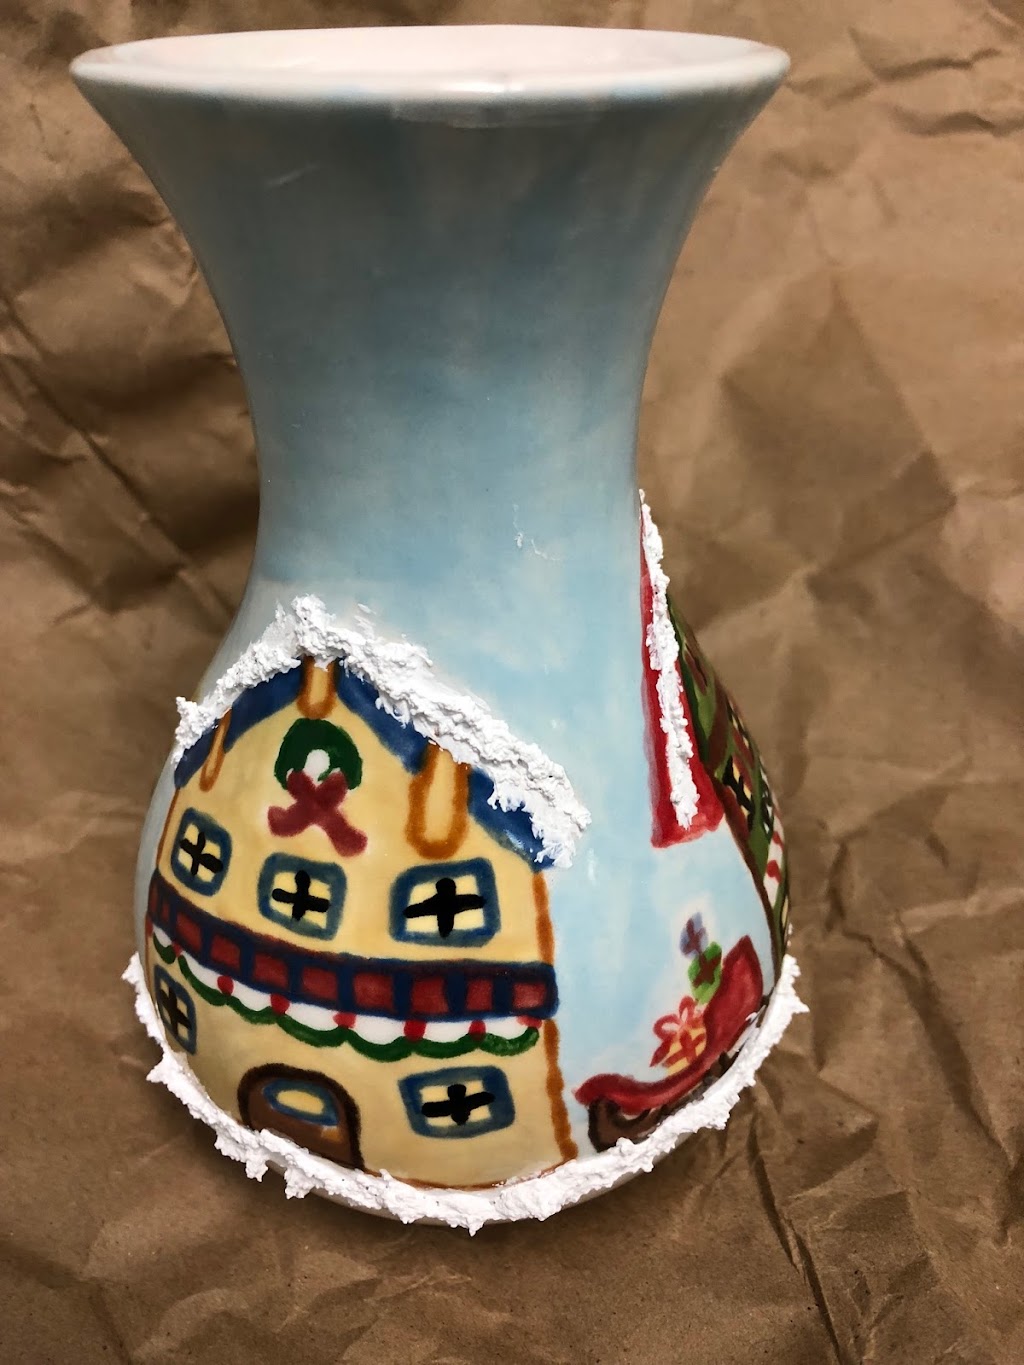 That Pottery Place | 217 Clarksville Rd, West Windsor Township, NJ 08550 | Phone: (609) 716-6200